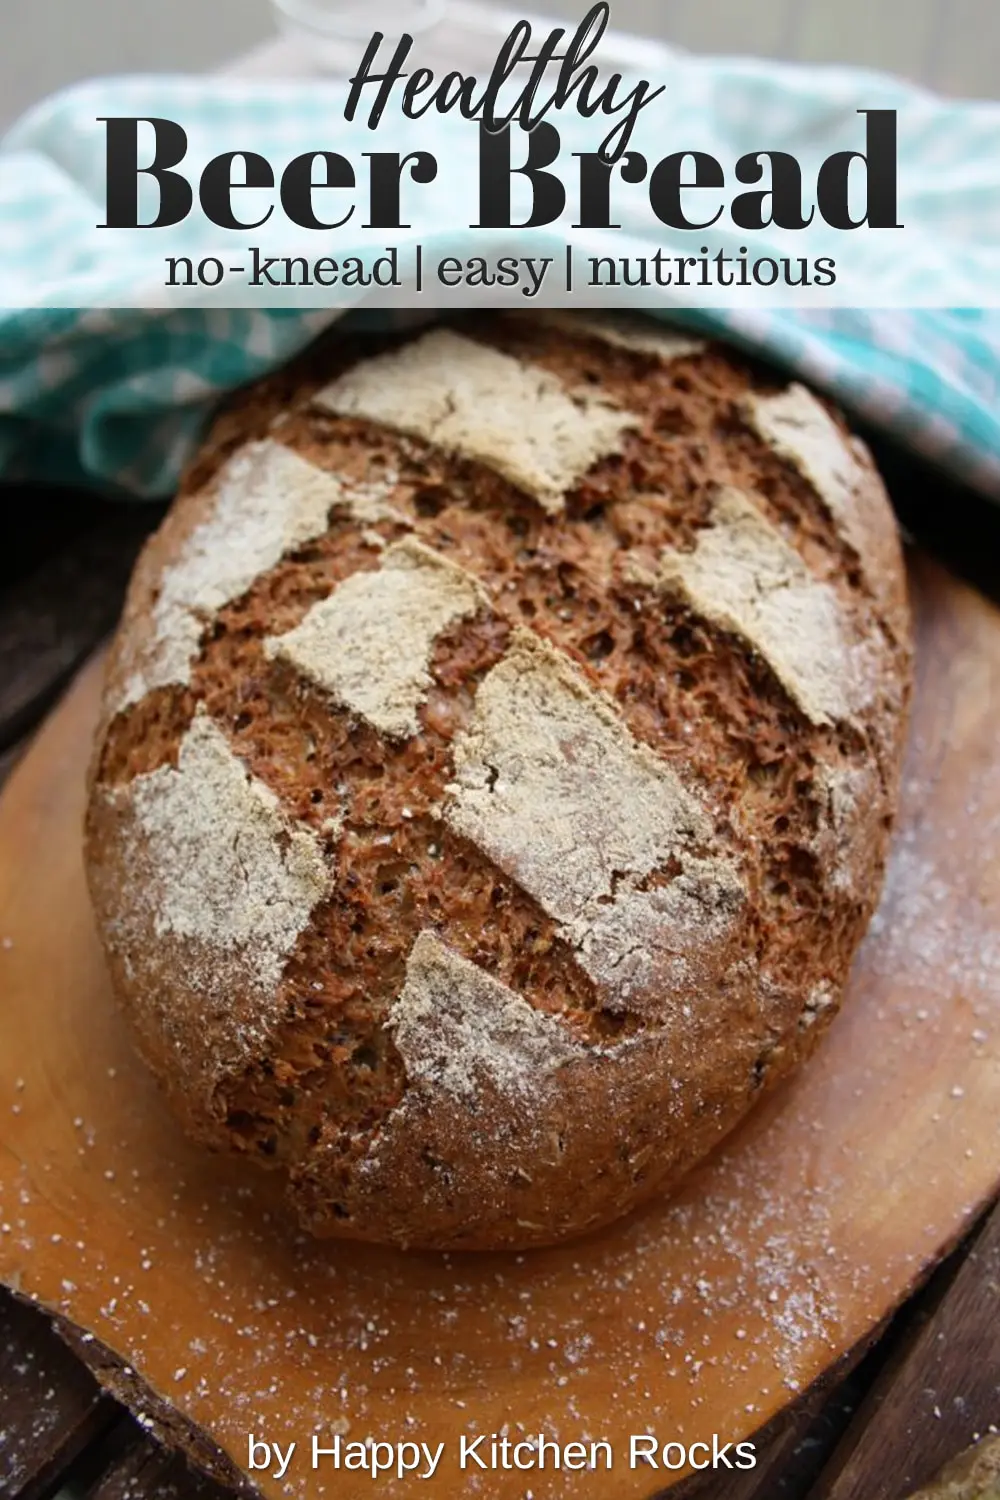 Easy No-Knead Beer Bread Collage with Text Overlay